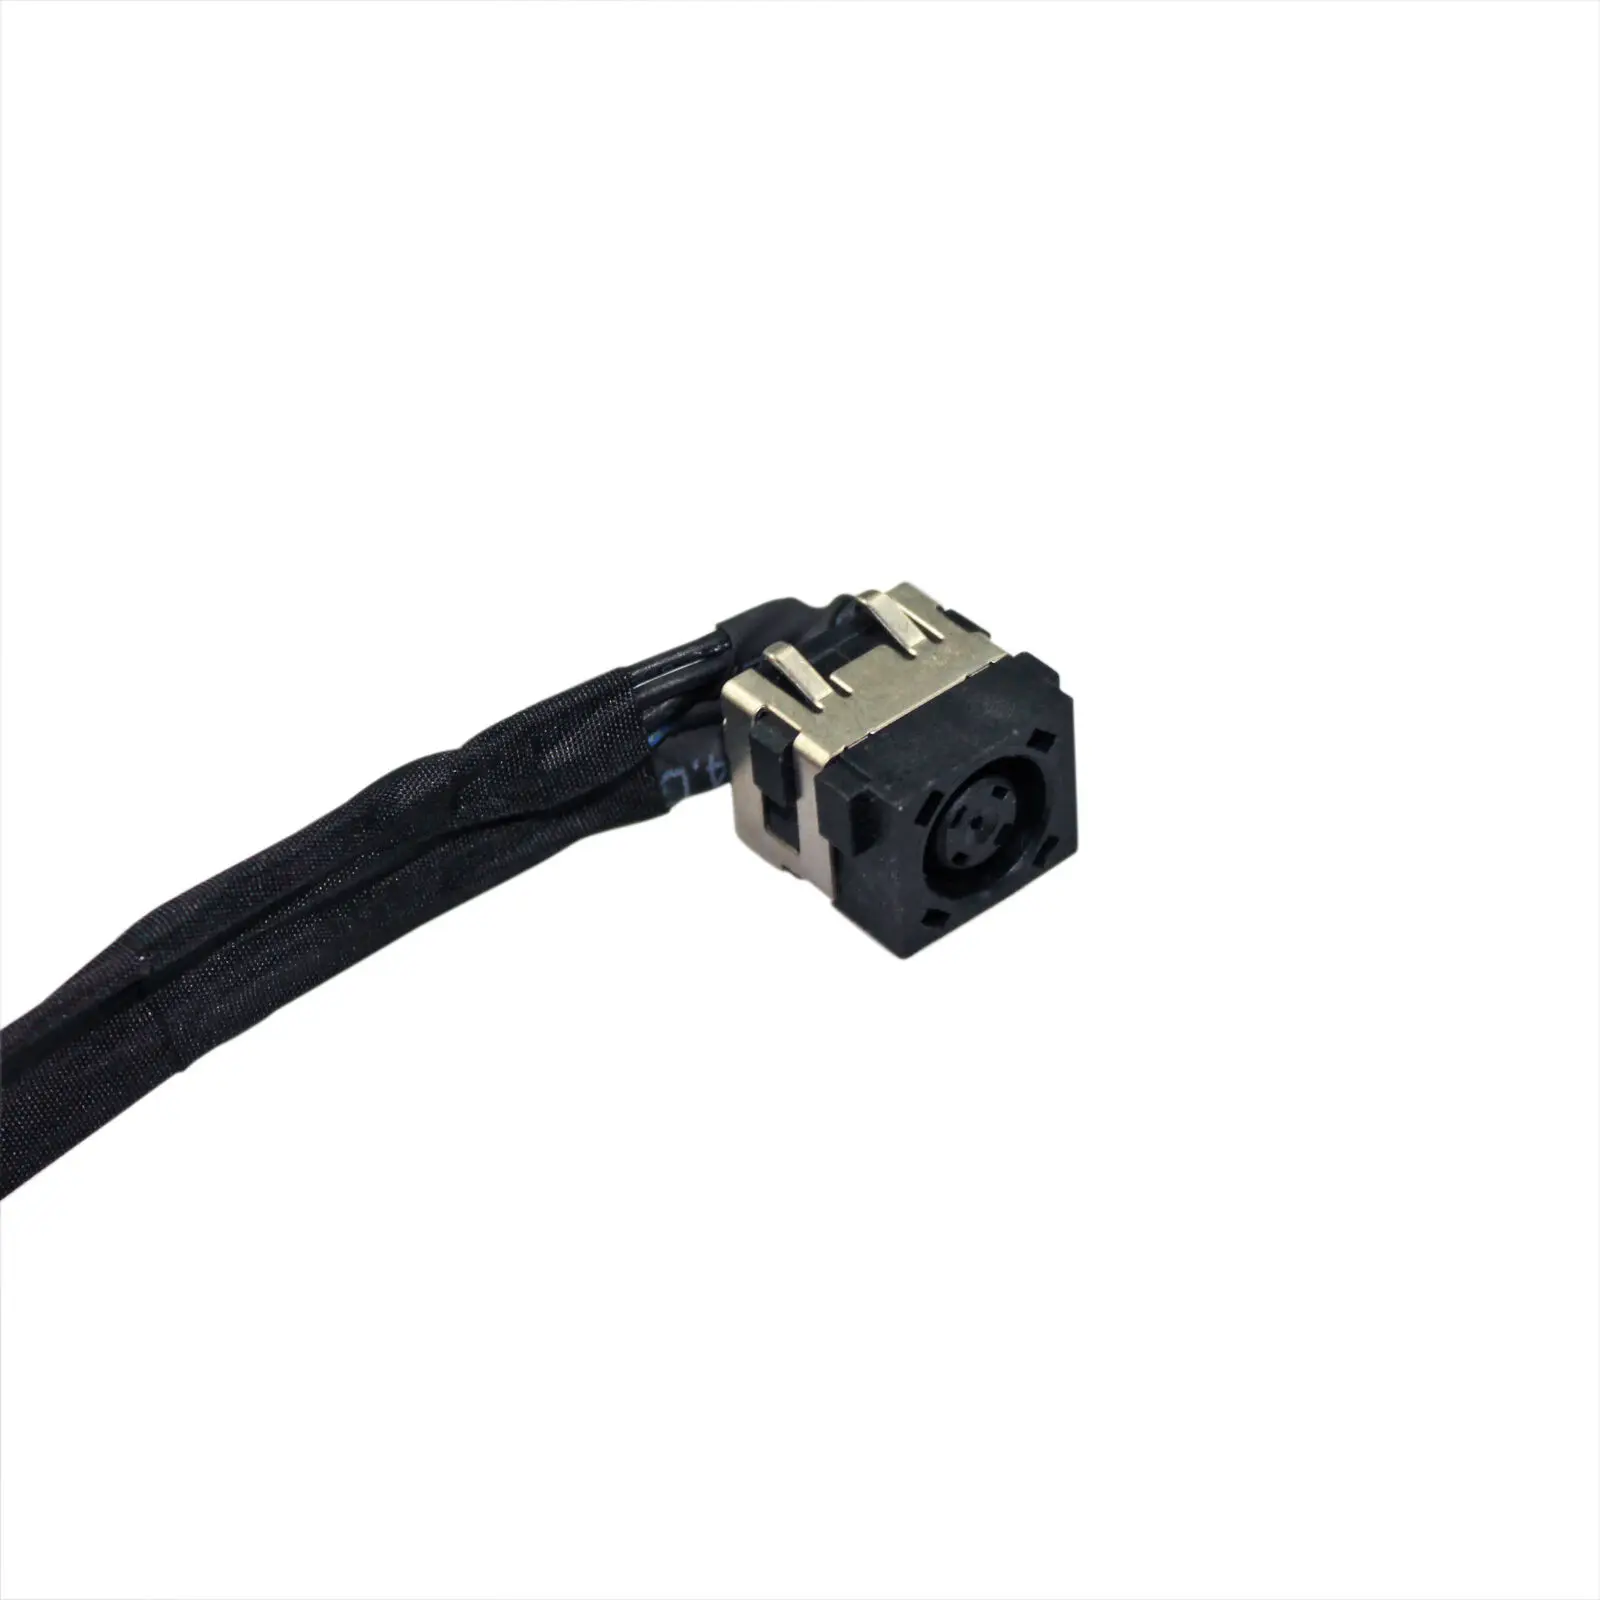 Buy New DC-IN Power Jack For Dell Alienware 17 R2 R3 P43F T8DK8 0T8DK8 DC30100TO00 Charging Socket Connector Harness Cable on